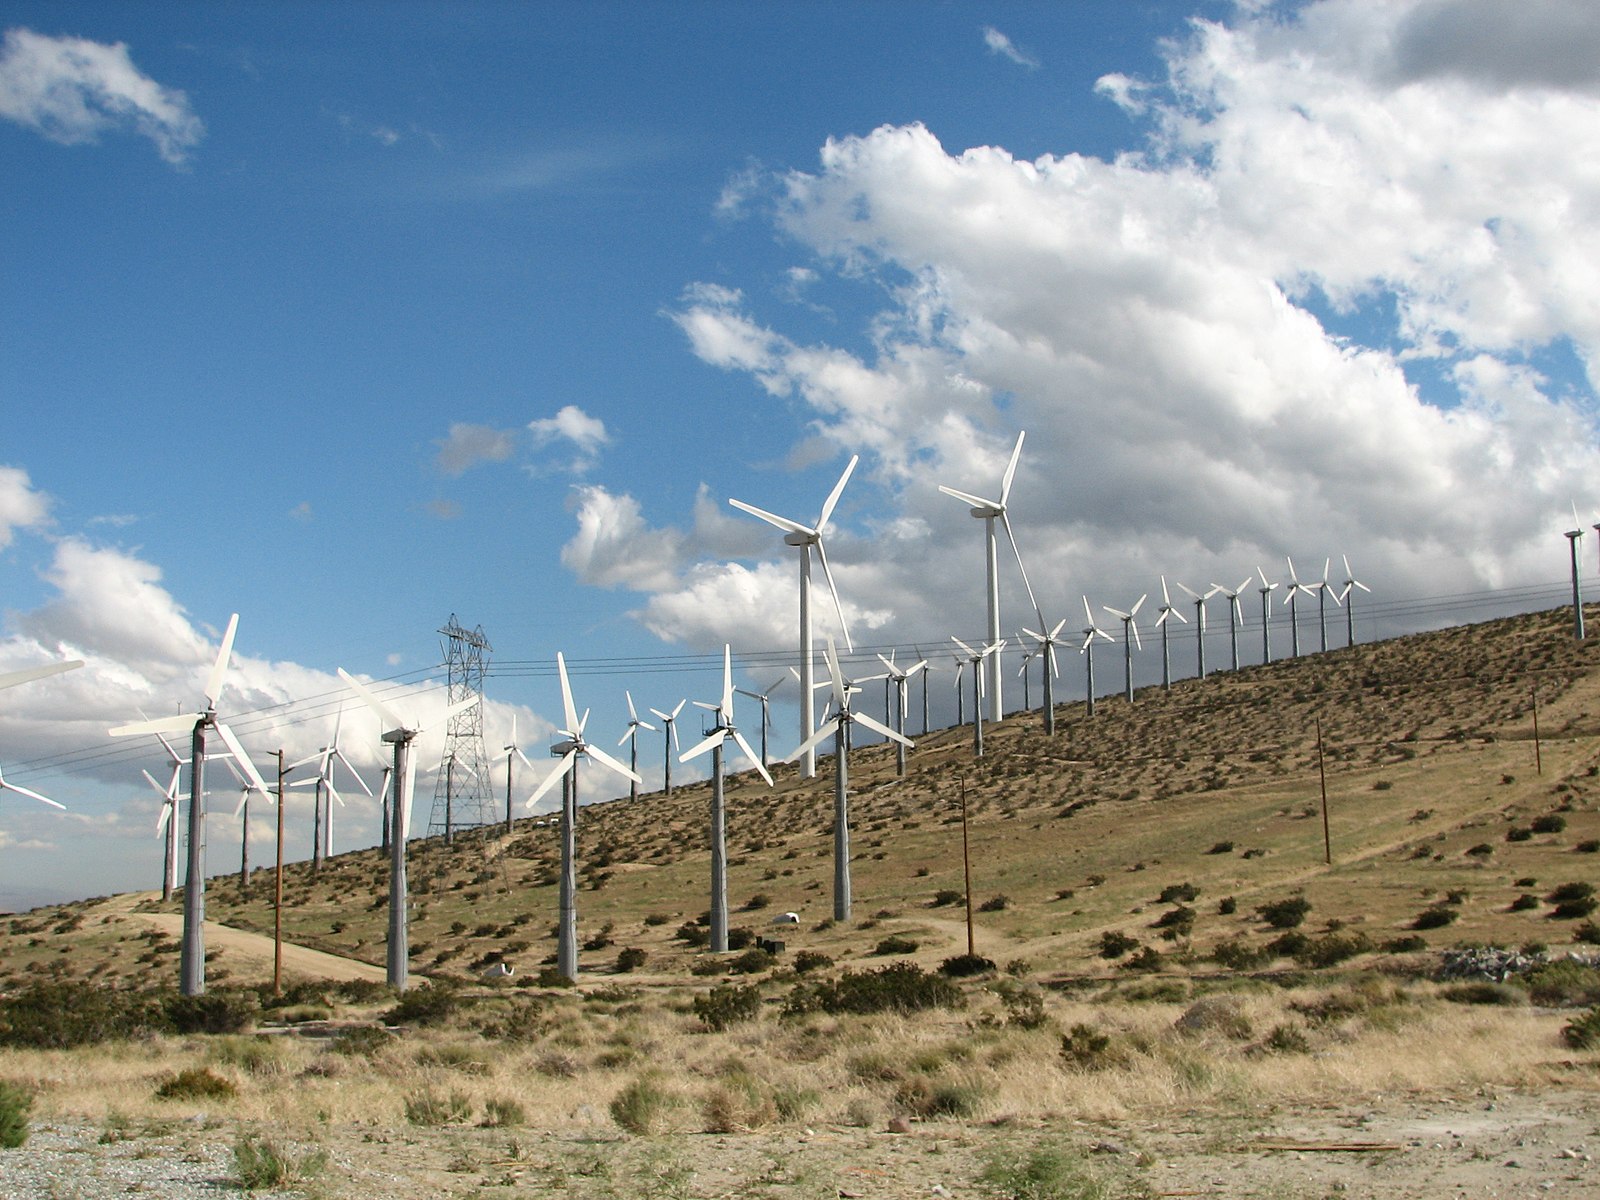 Dozens of wind turbines installed on a dried grassy hill against a blue sky with white clouds.